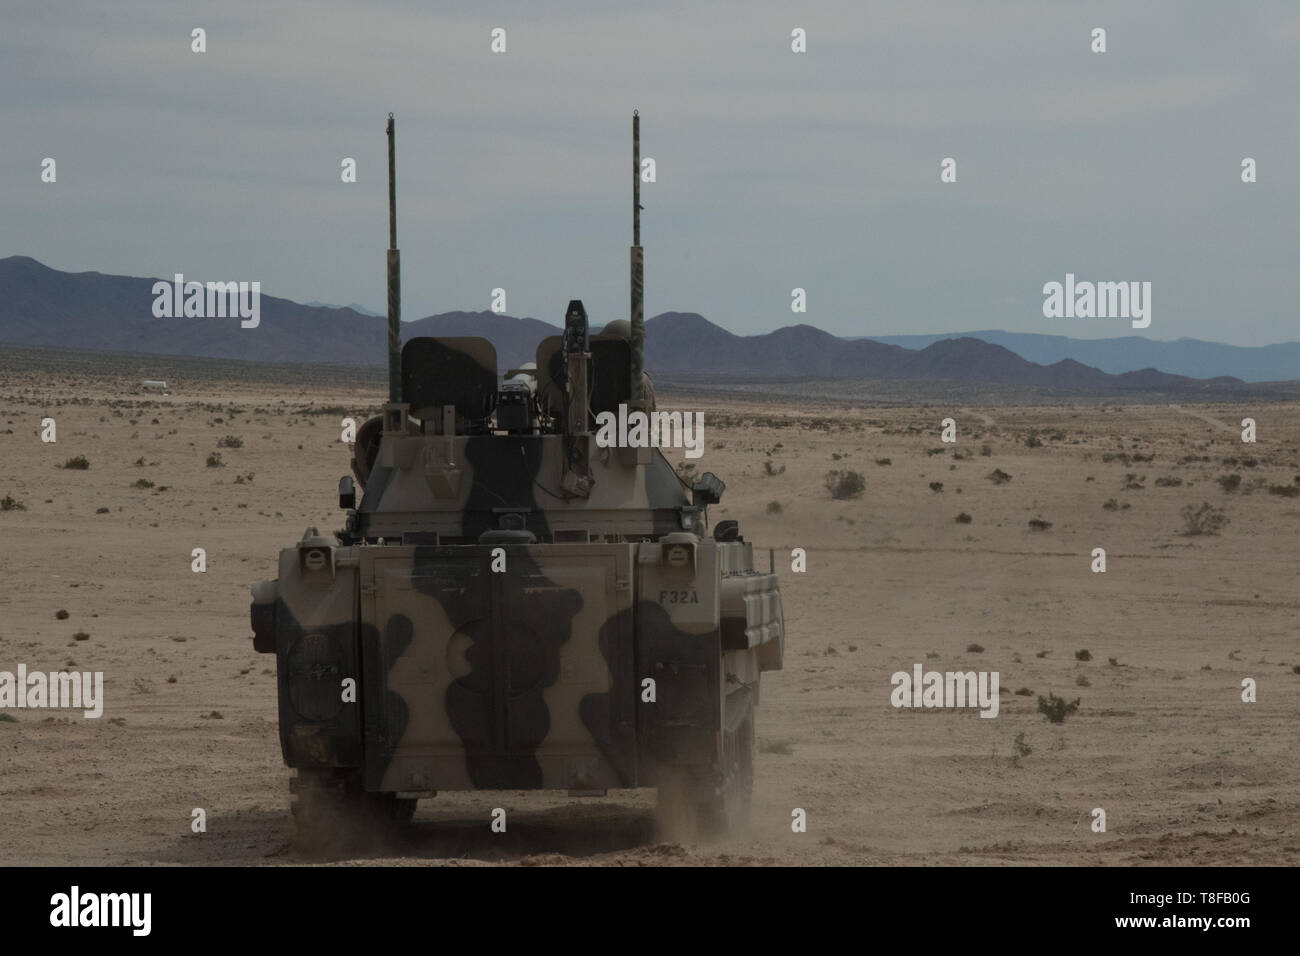 11th Armored Cavalry Troopers hold their position awaiting the advancing elements of the 2nd Armored Brigade Combat Team, 1st Cavalry Division, National Training Center, Calif., April 11th, 2019. This defense will test the 2/1 ABCT Cav’s ability to attack and hold a foreign city. (U.S. Army Photo By Pv2 James Newsome) Stock Photo